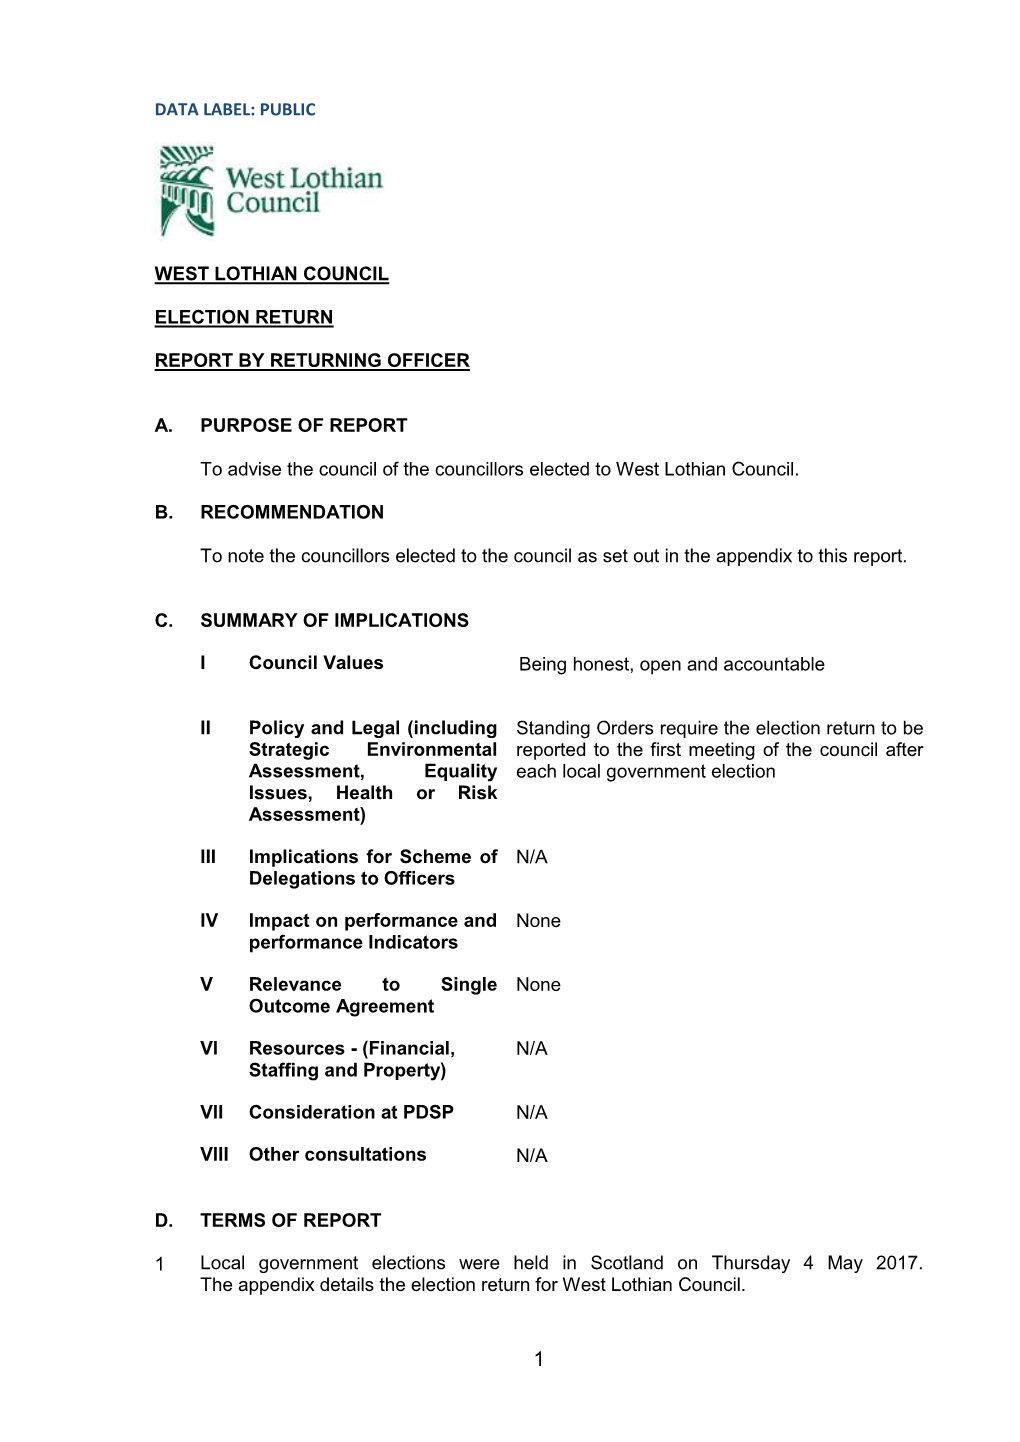 PUBLIC WEST LOTHIAN COUNCIL ELECTION RETURN REPORT by RETURNING OFFICER A. PURPOSE of REPORT to Advise the Counc